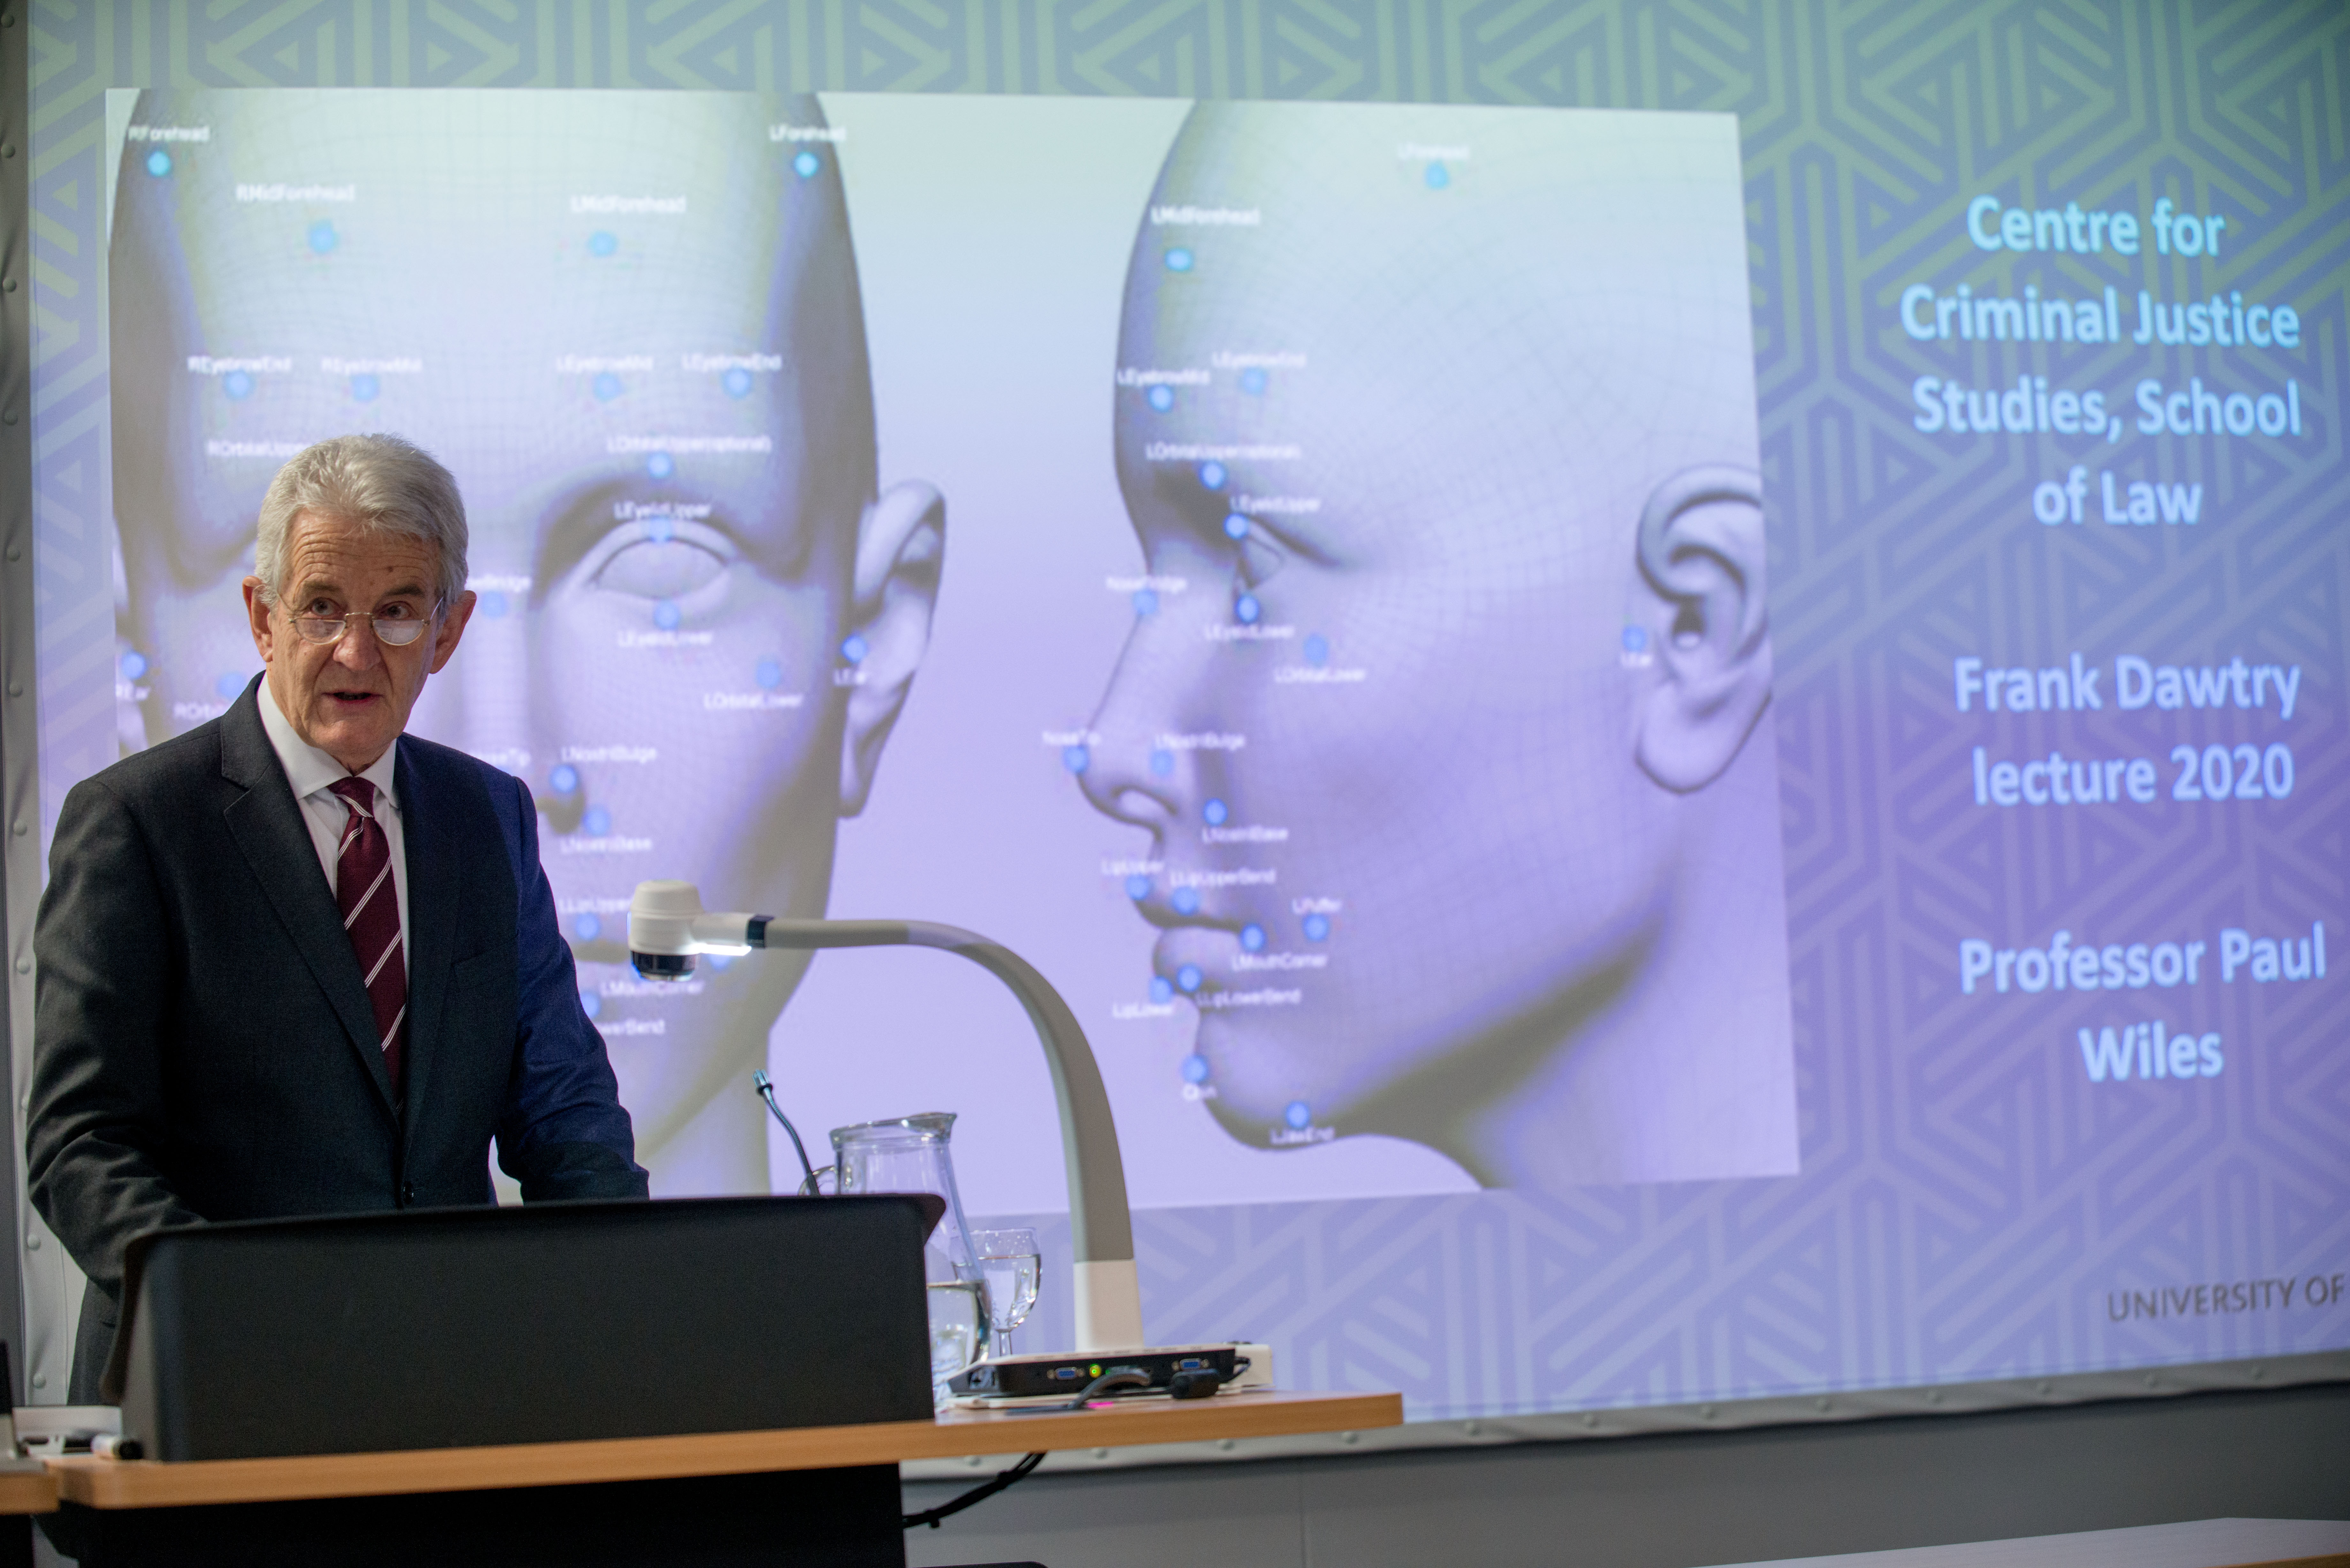 The UK’s Biometrics Commissioner gives insight into the new technologies being used to combat crime at the annual Frank Dawtry Memorial Lecture